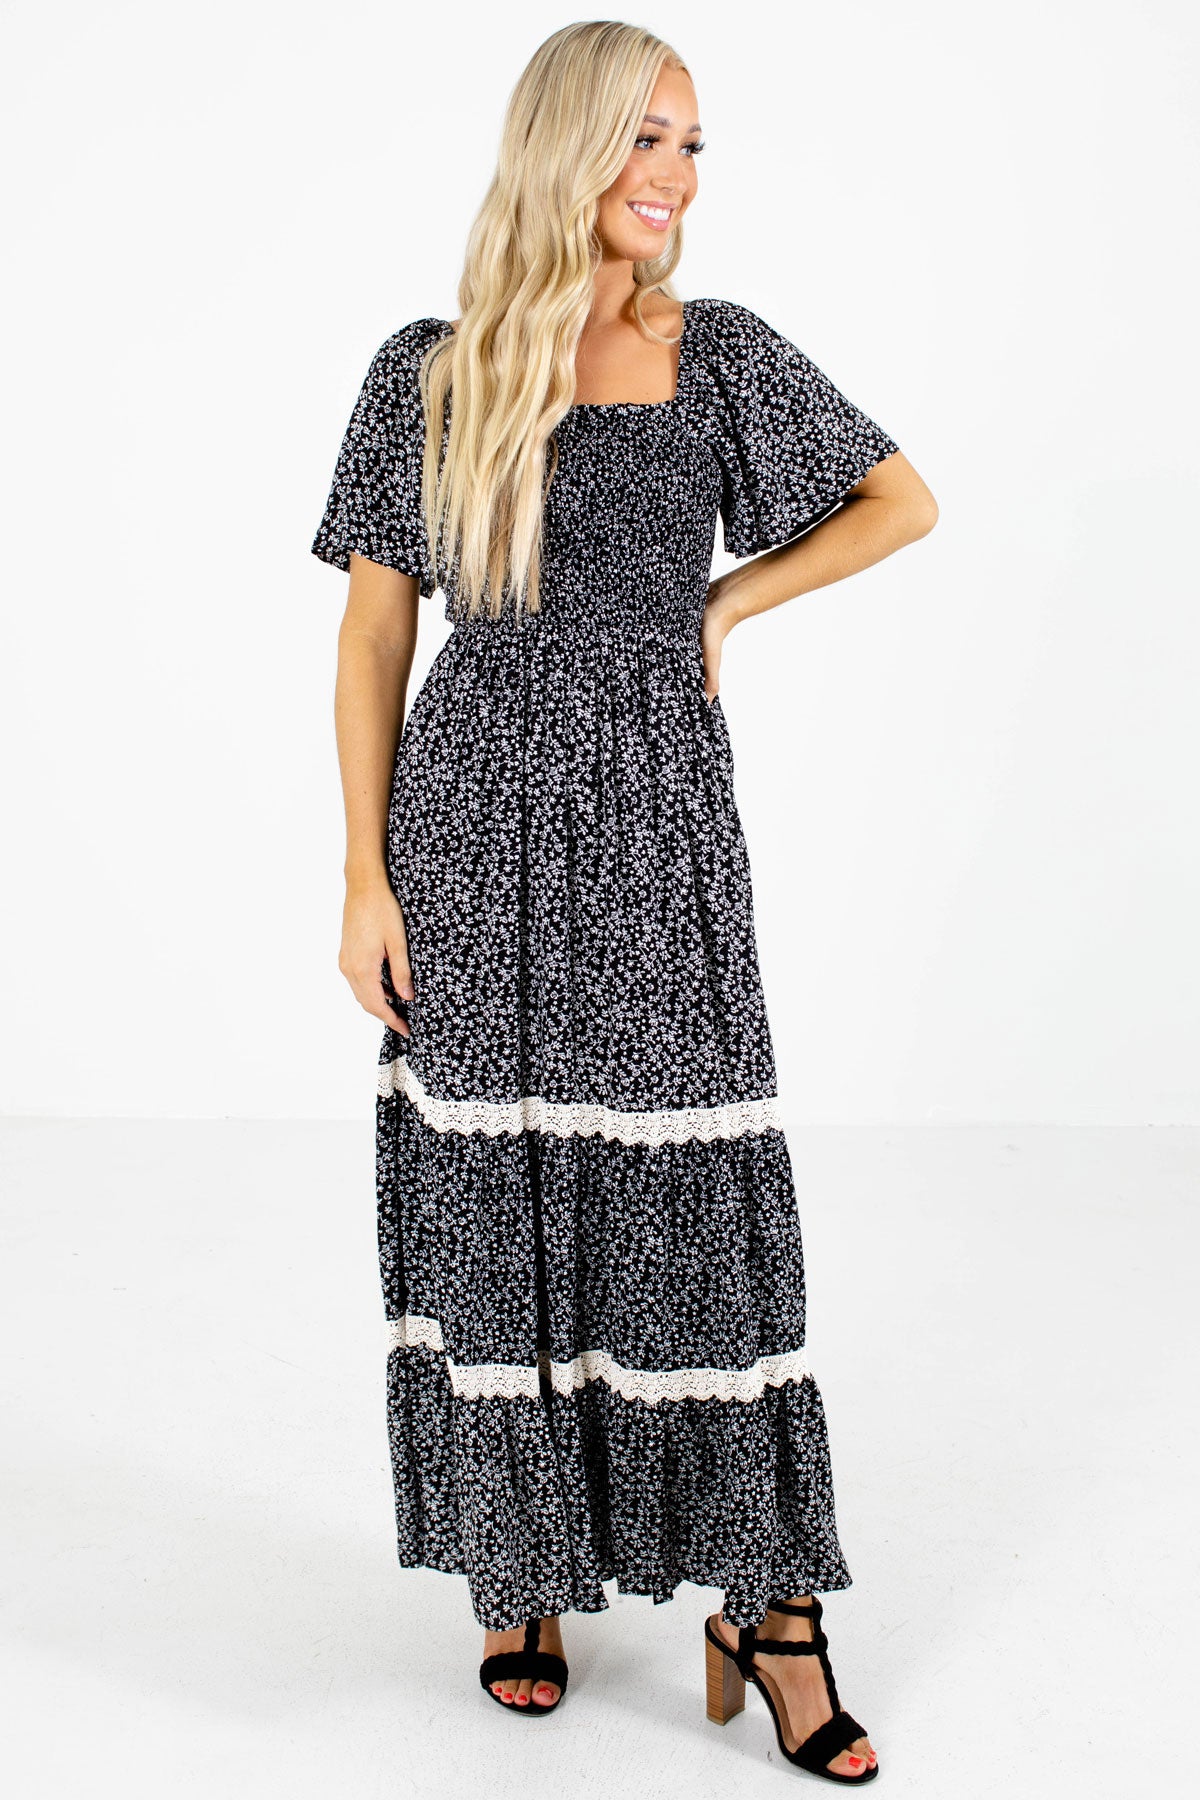 Black and White Floral Boutique Maxi Dresses for Women